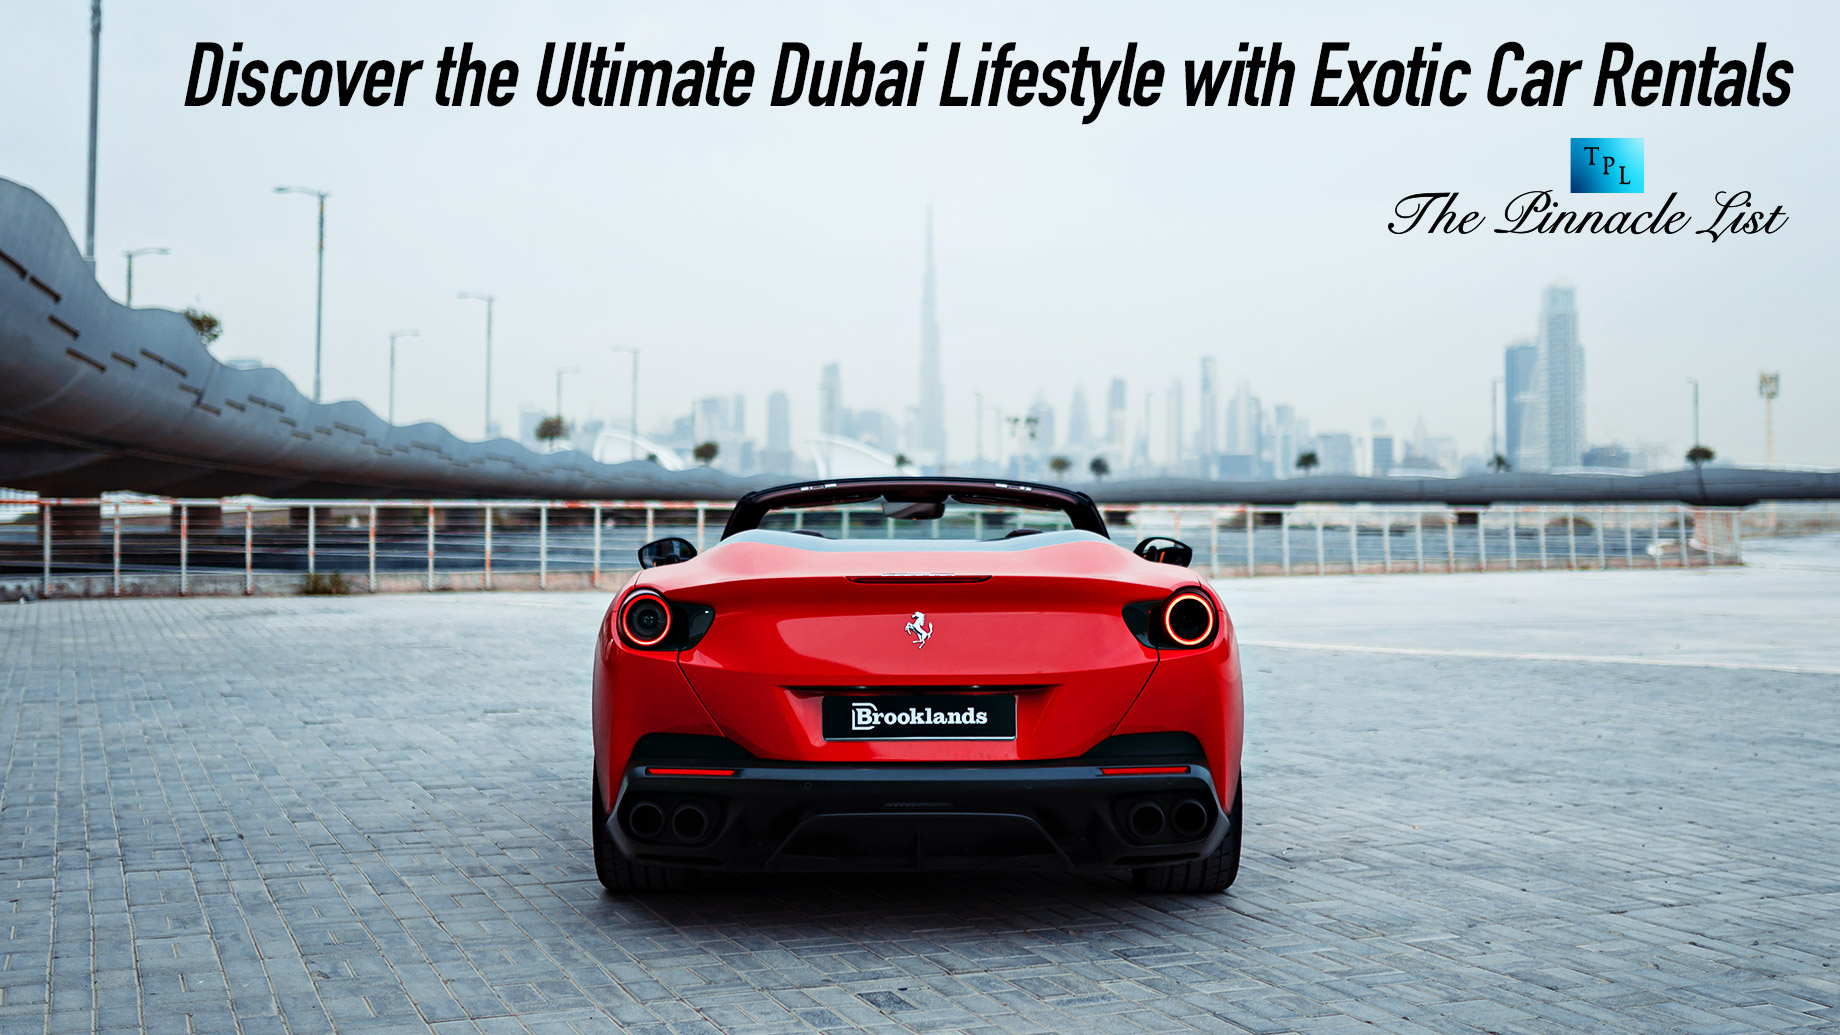 Discover the Ultimate Dubai Lifestyle with Exotic Car Rentals